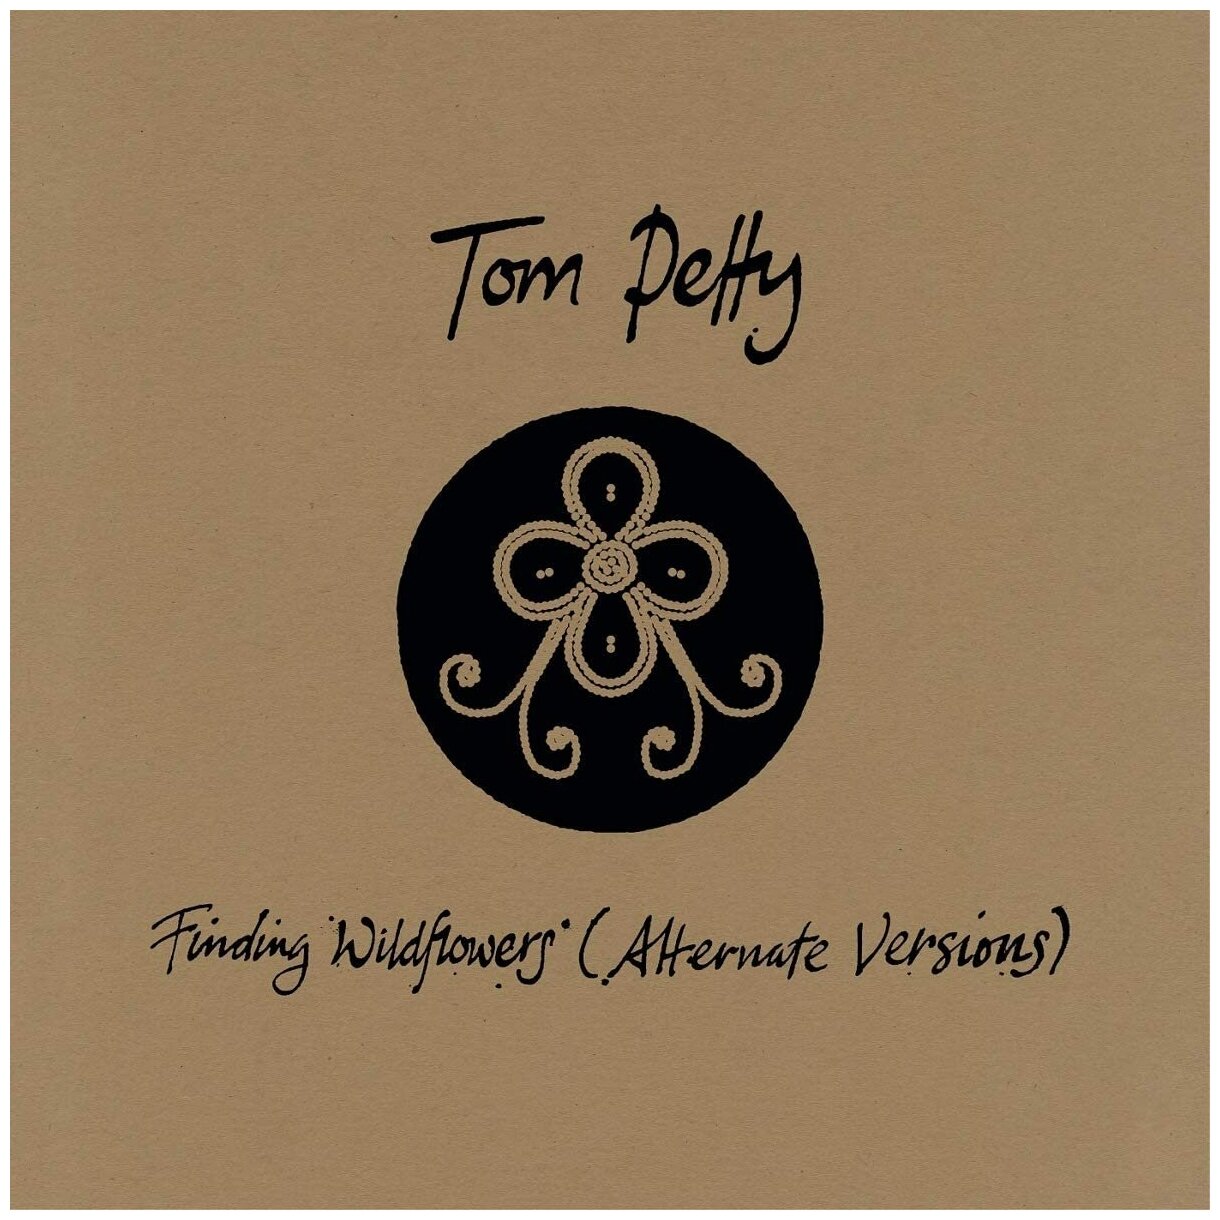 Tom Petty Tom Petty - Finding Wildflowers (alternate Versions) (limited, Colour, 2 LP) Warner Music - фото №1